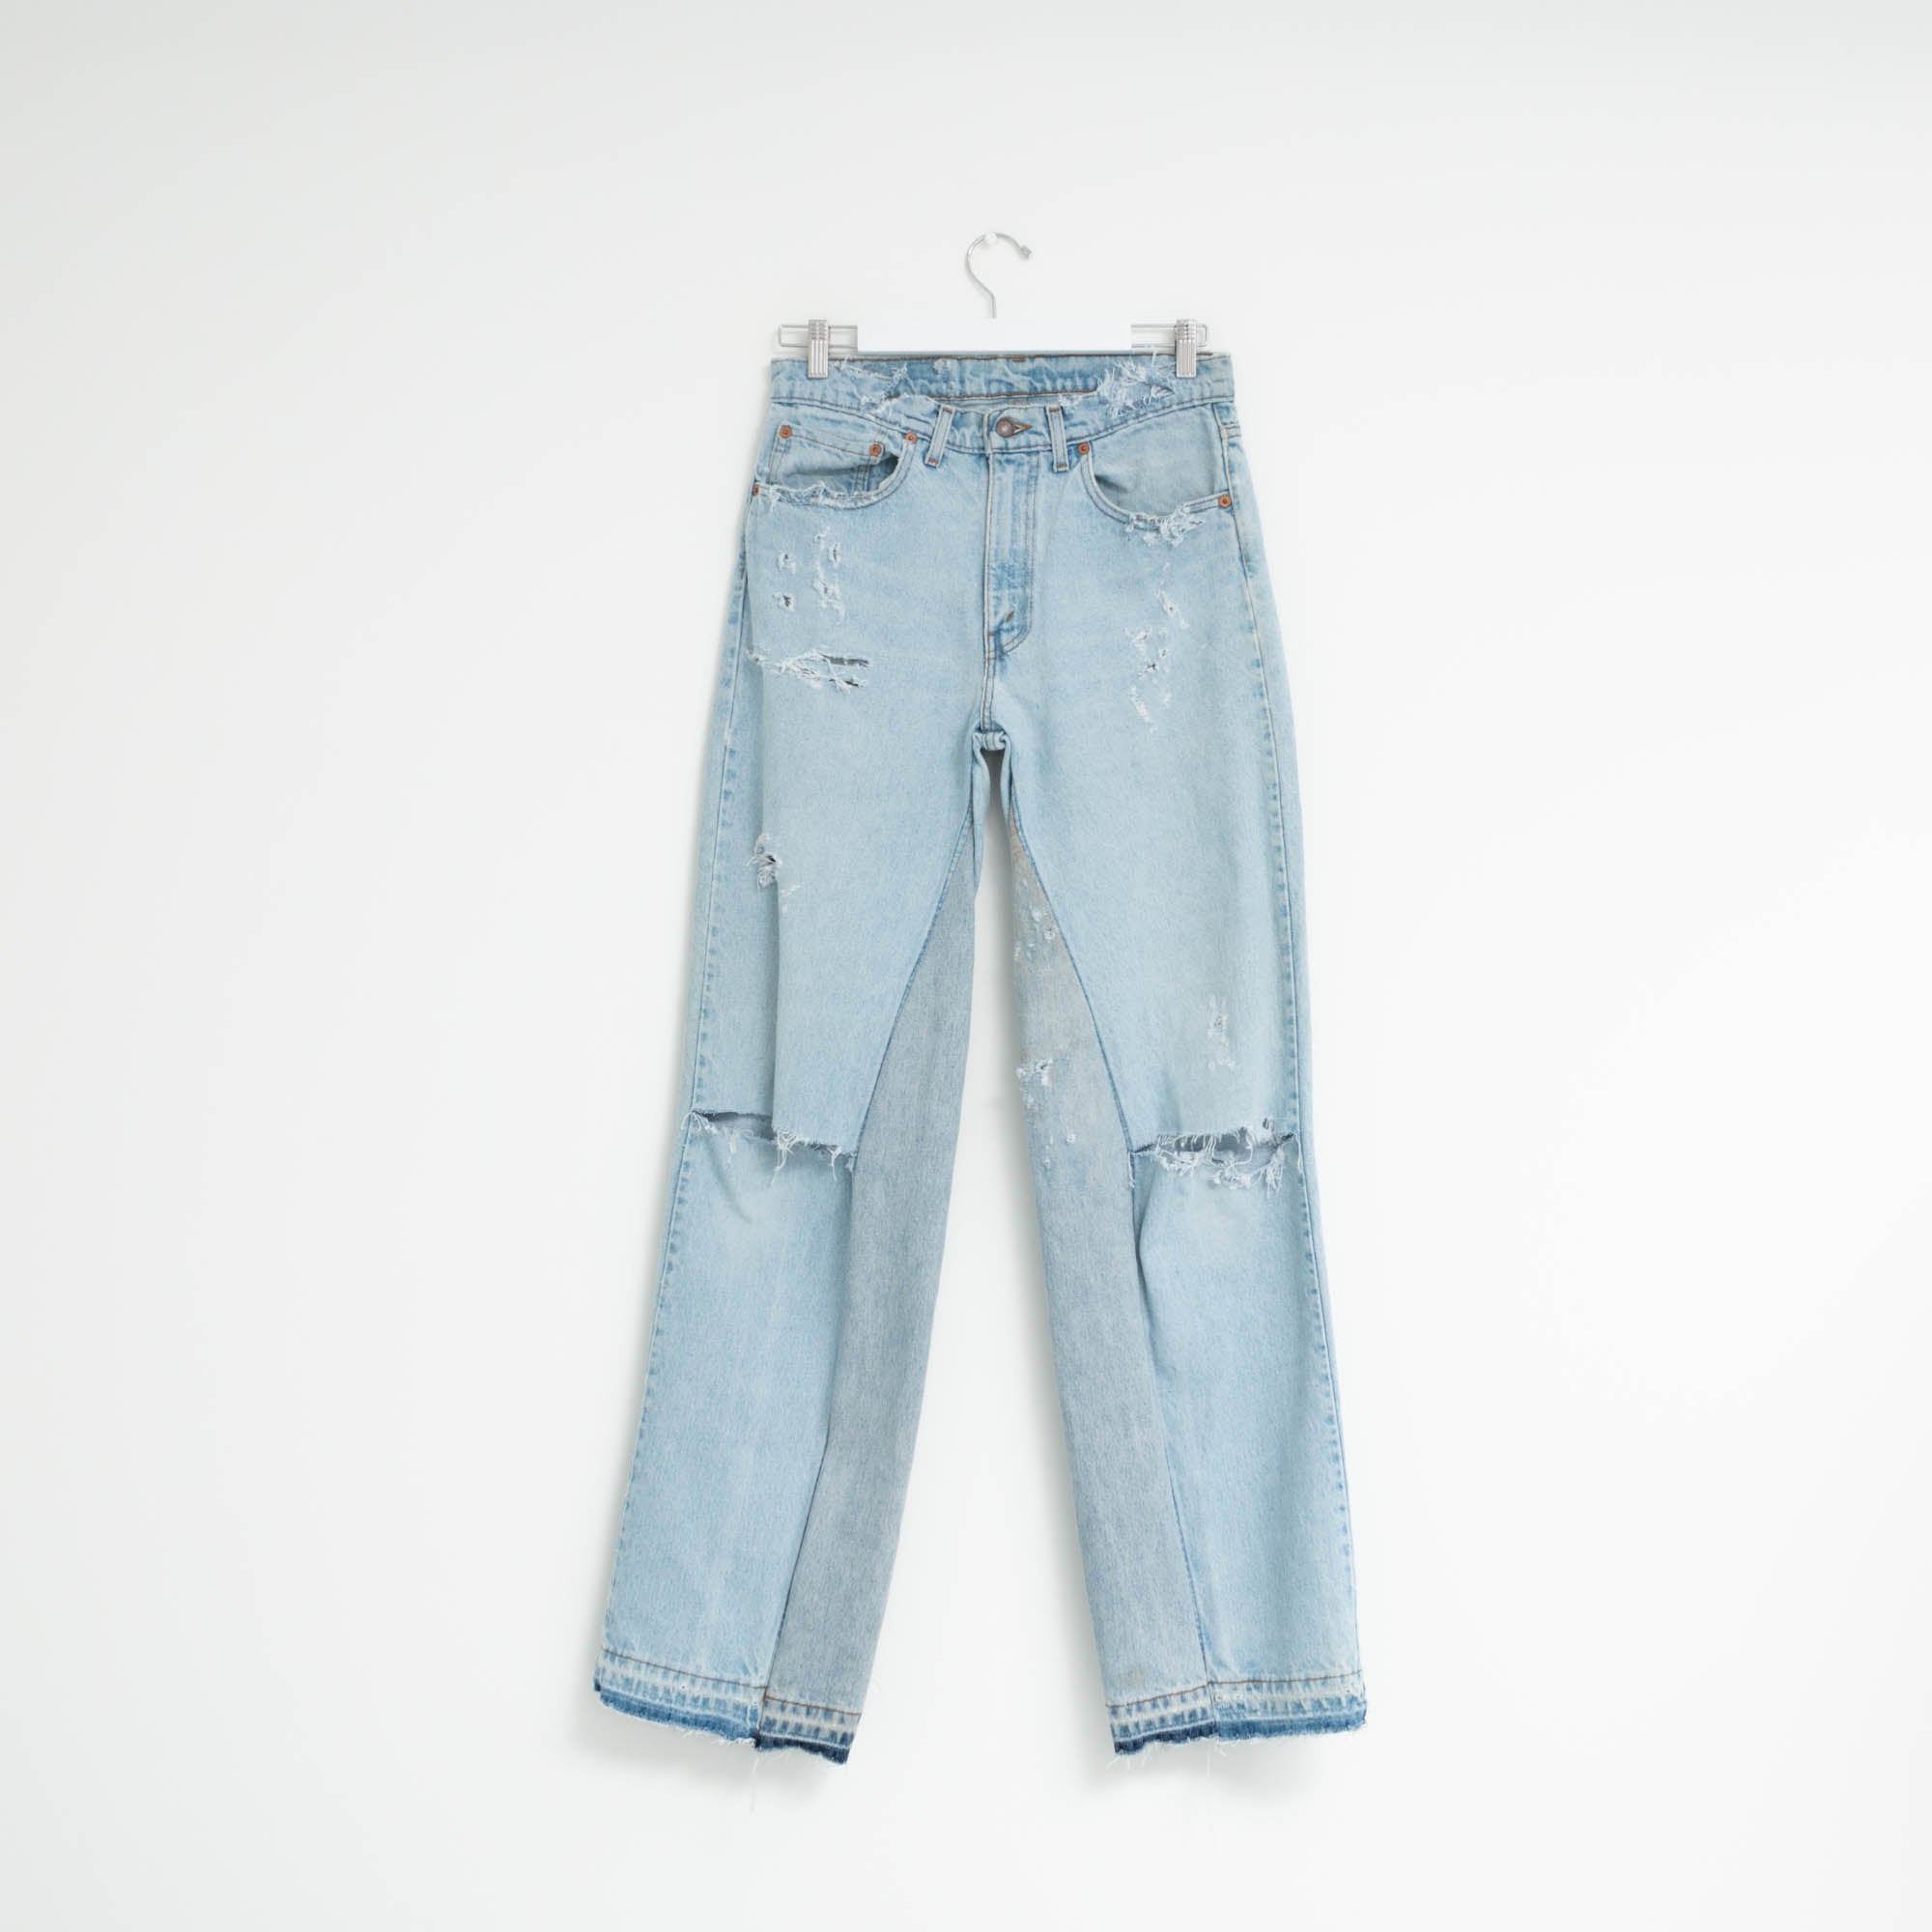 "FLARE" Jeans W31 L35